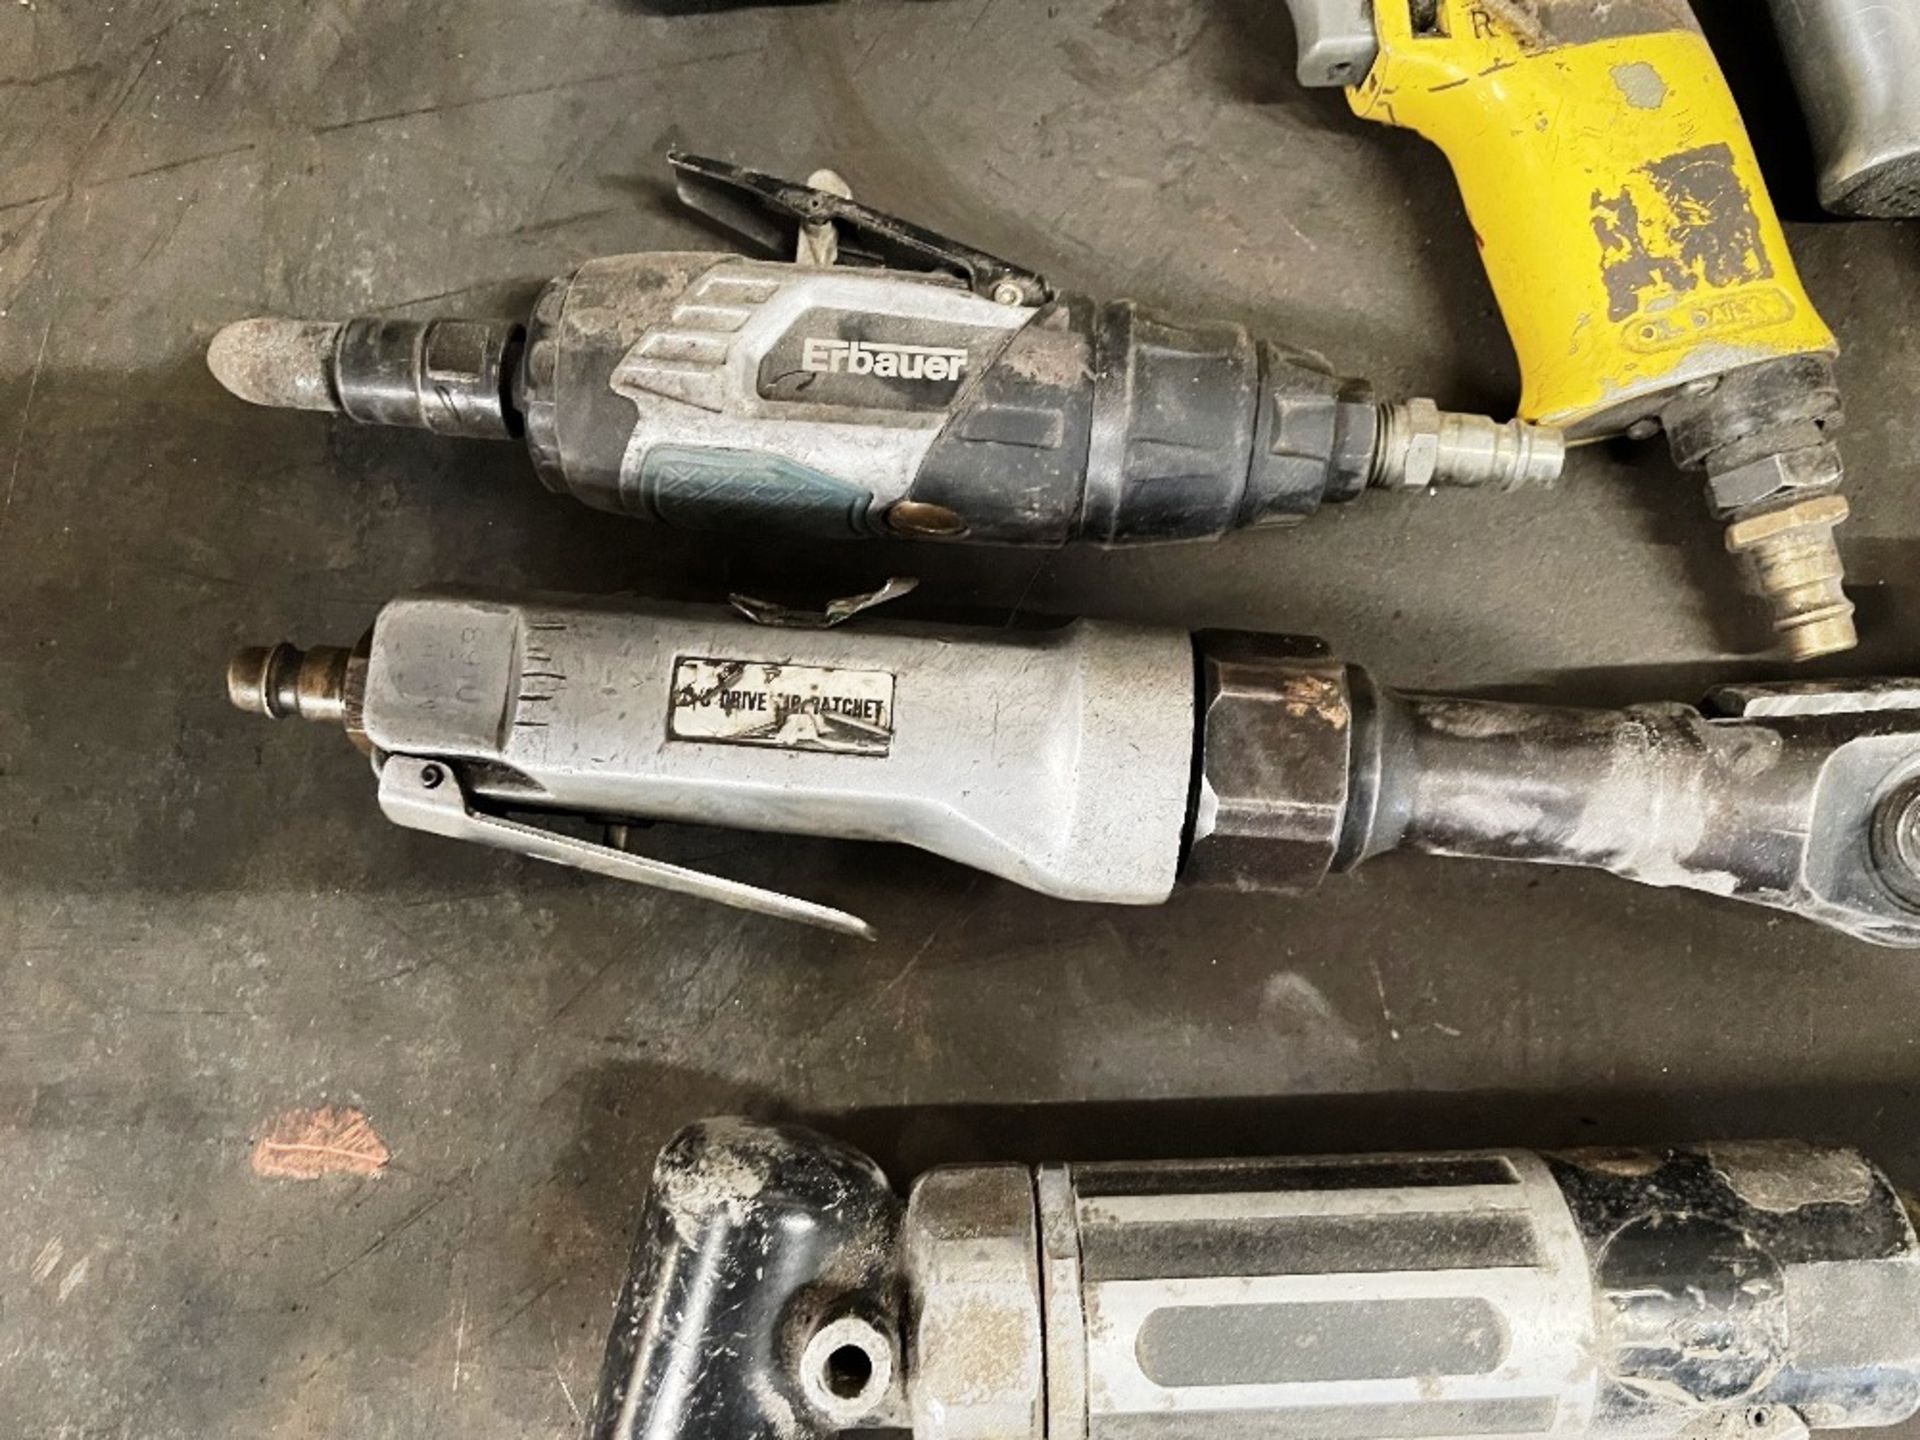 8 x Various Pneumatic Tools - As Pictured - Image 3 of 5